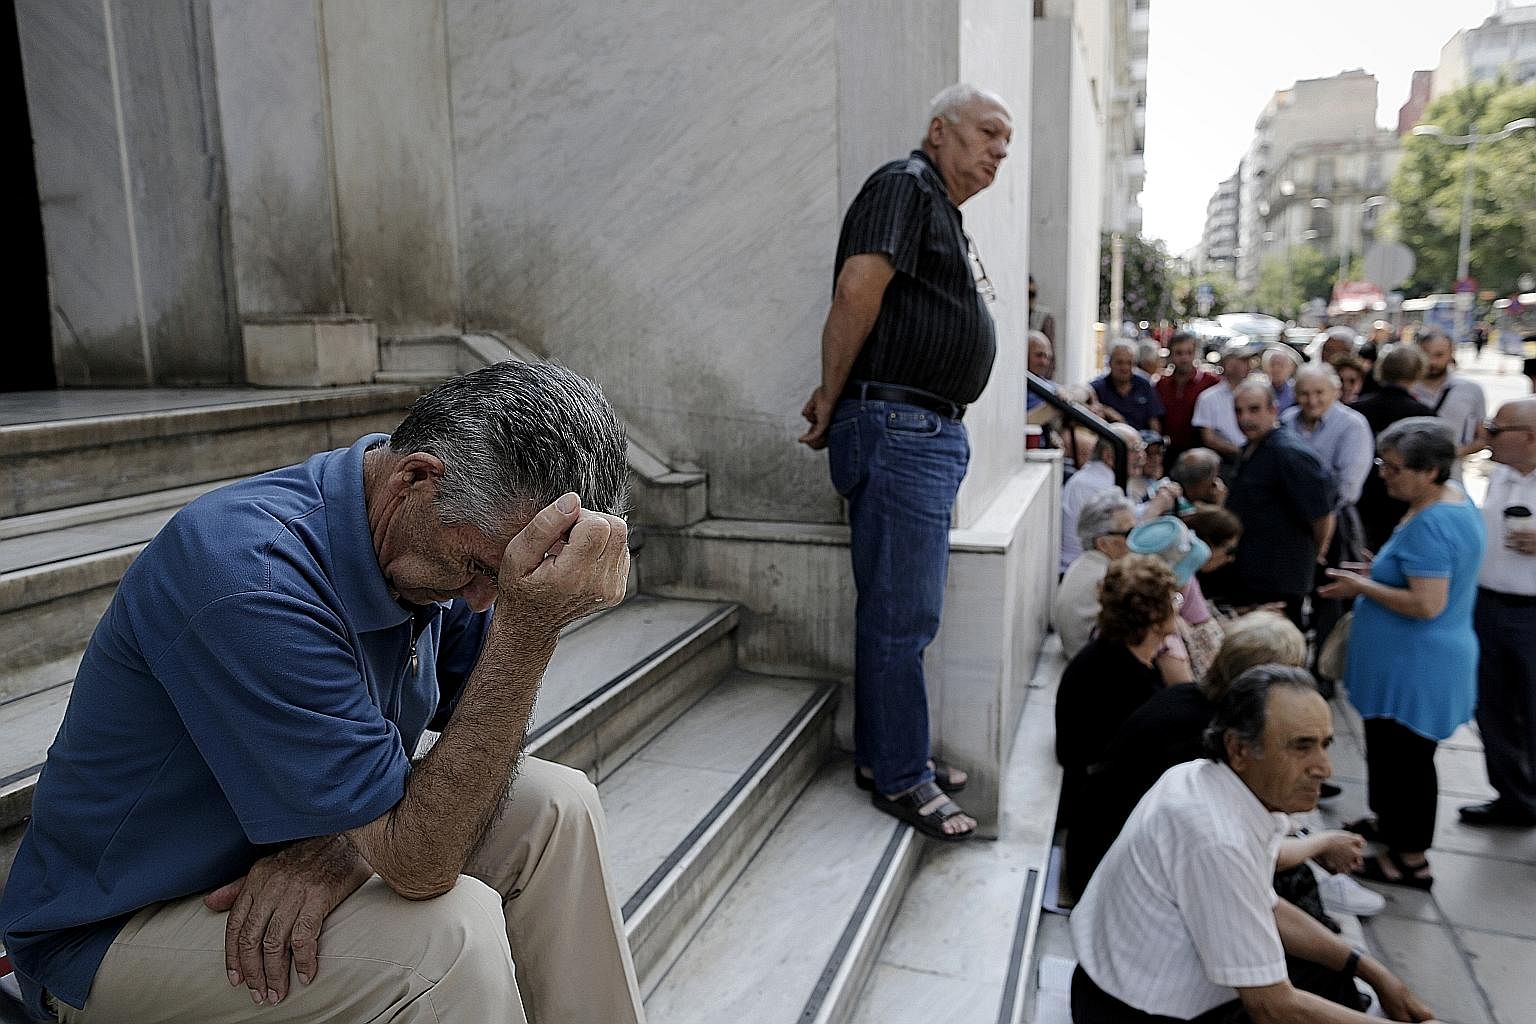 Greek pensioners waiting outside a branch of the National Bank of Greece earlier this week, in the hope that it might open. Greece has closed banks and imposed capital controls in an attempt to avert the collapse of its financial system.